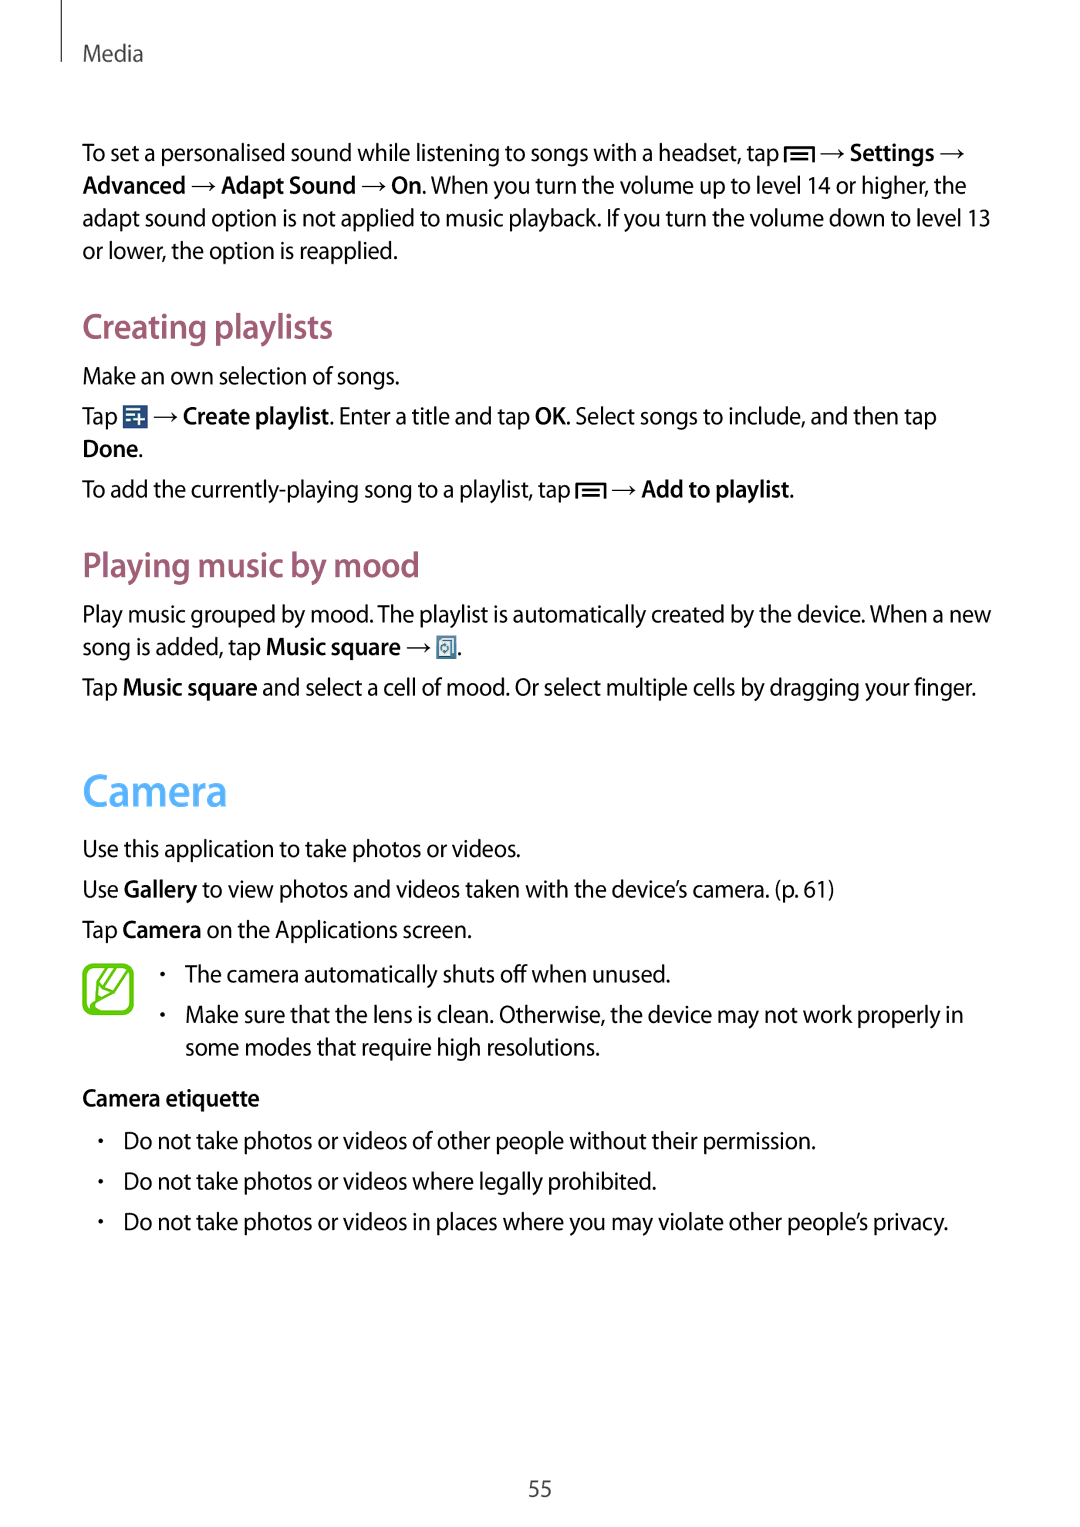 Samsung SM-T310 user manual Creating playlists, Playing music by mood, Camera etiquette 